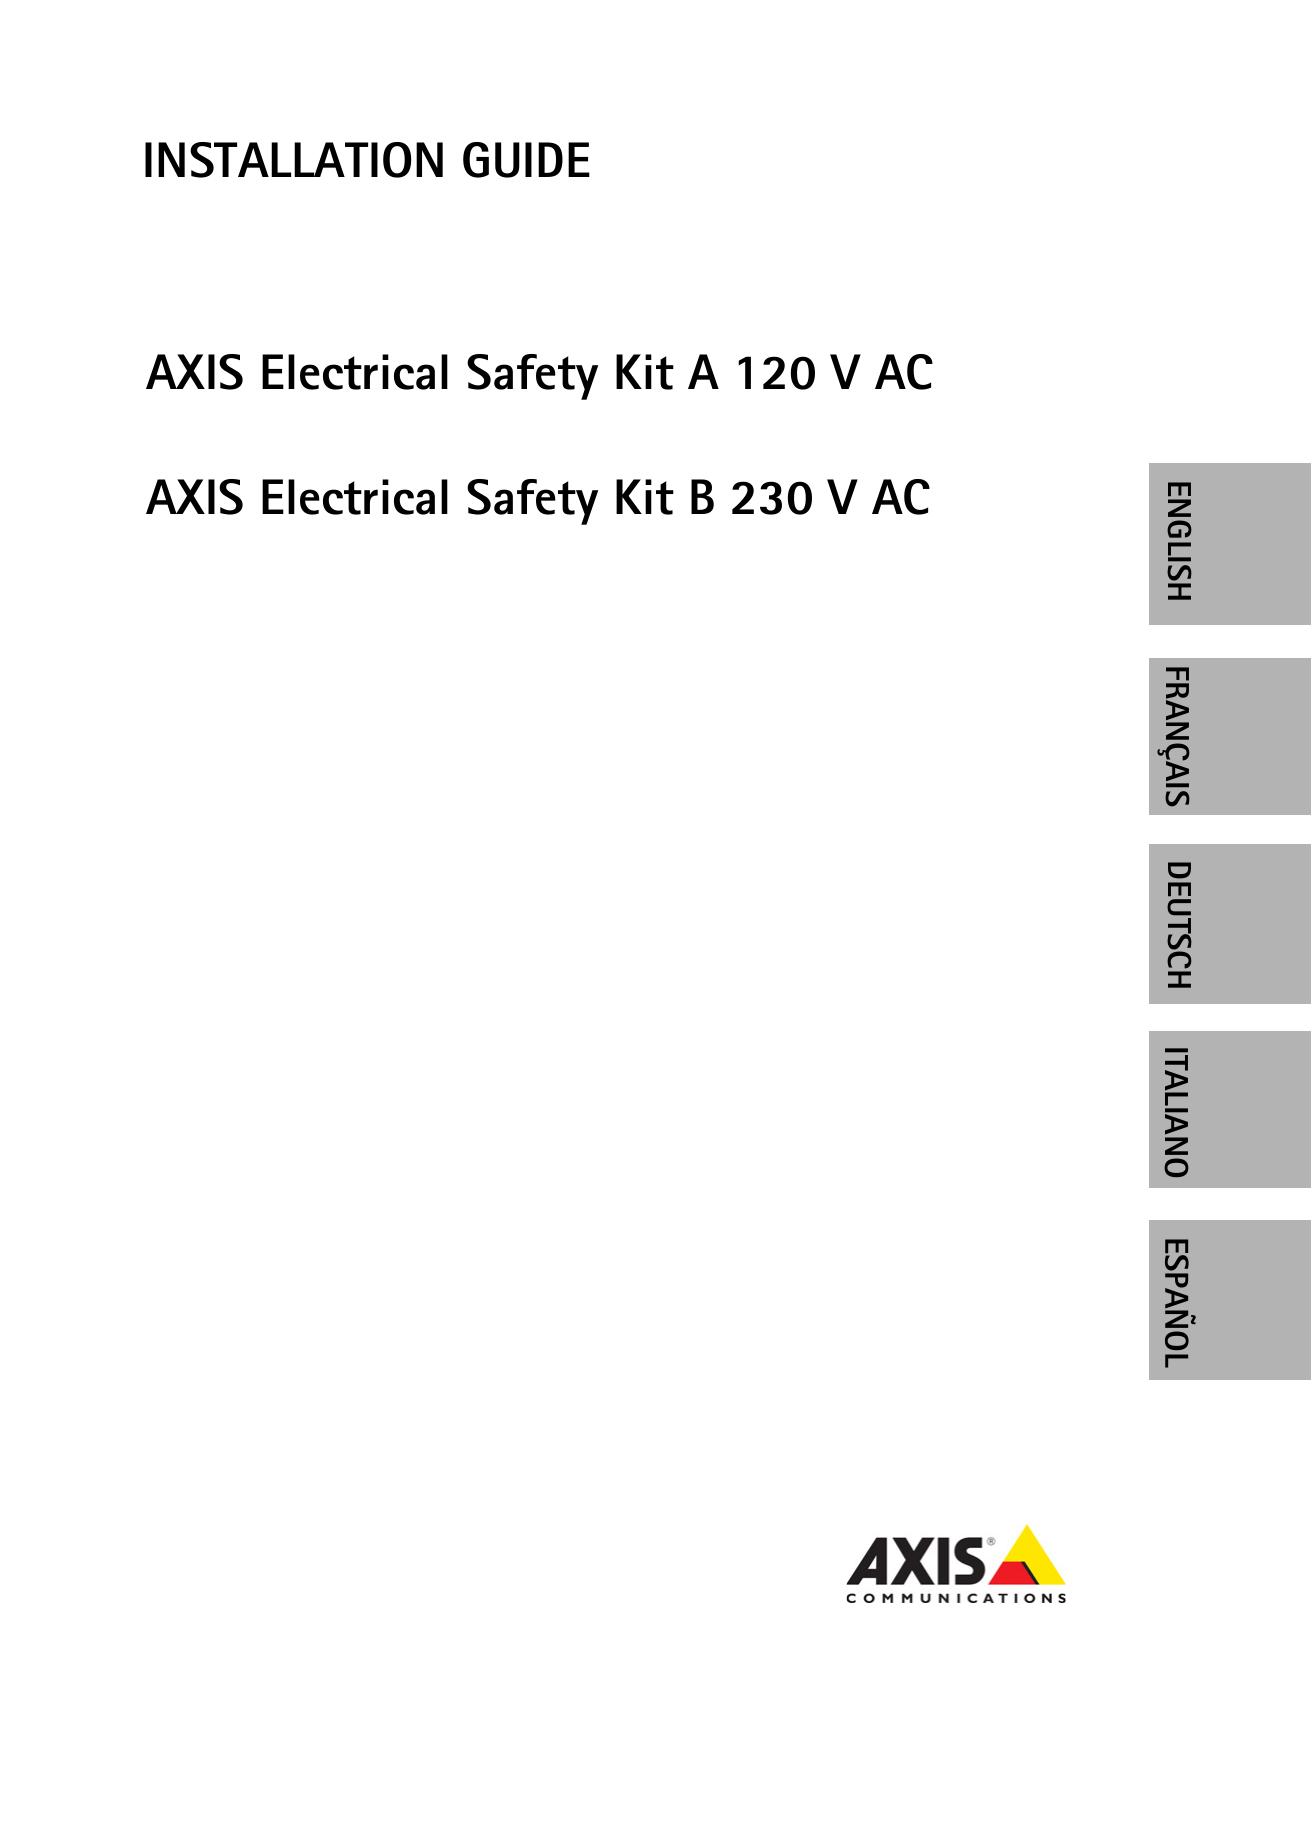 Axis Communications A 120 V AC Marine Safety Devices User Manual